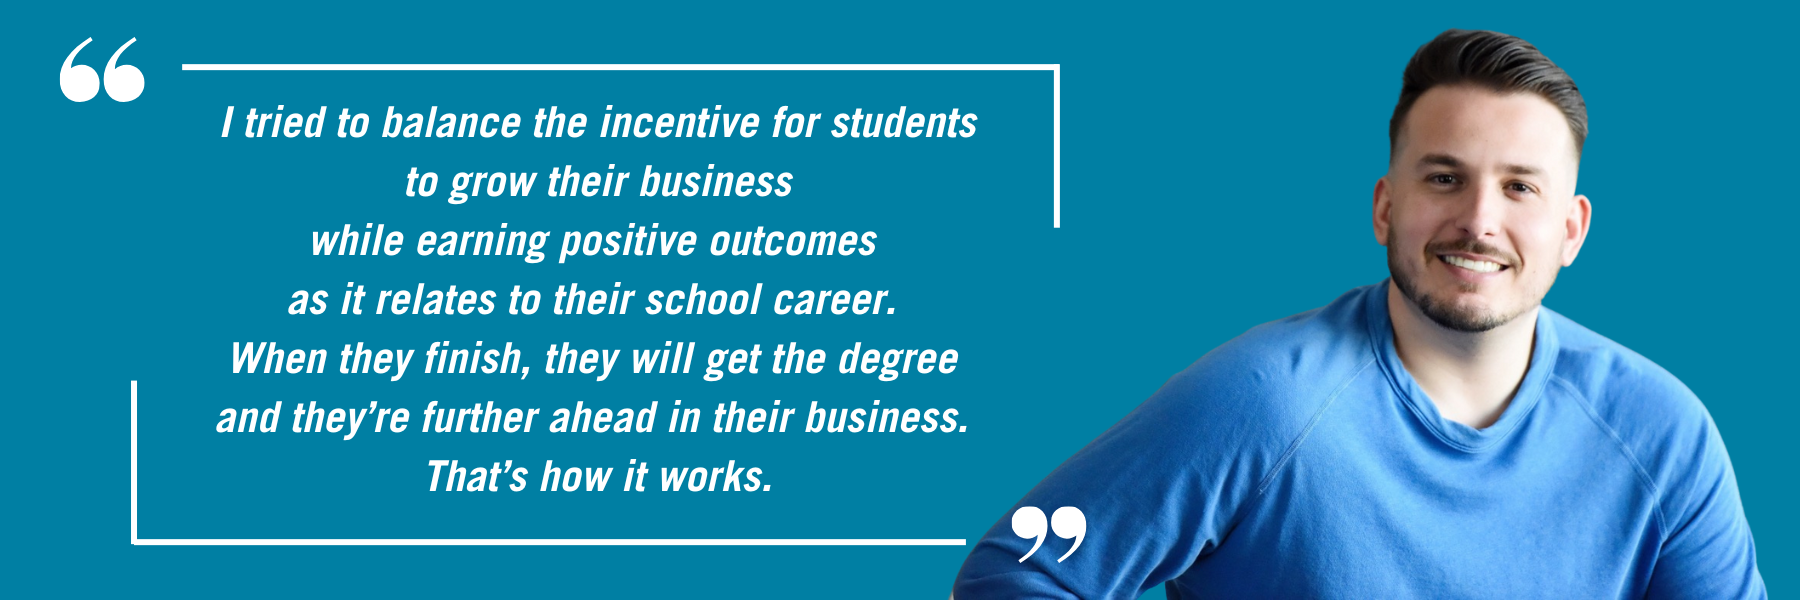 Joe gagliese's headshot, along with the quote: I tried to balance the incentive for students to grow their business while earning positive outcomes as it relates to their school career. When they finish, they will get the degree and they’re further ahead in their business. That’s how it works.